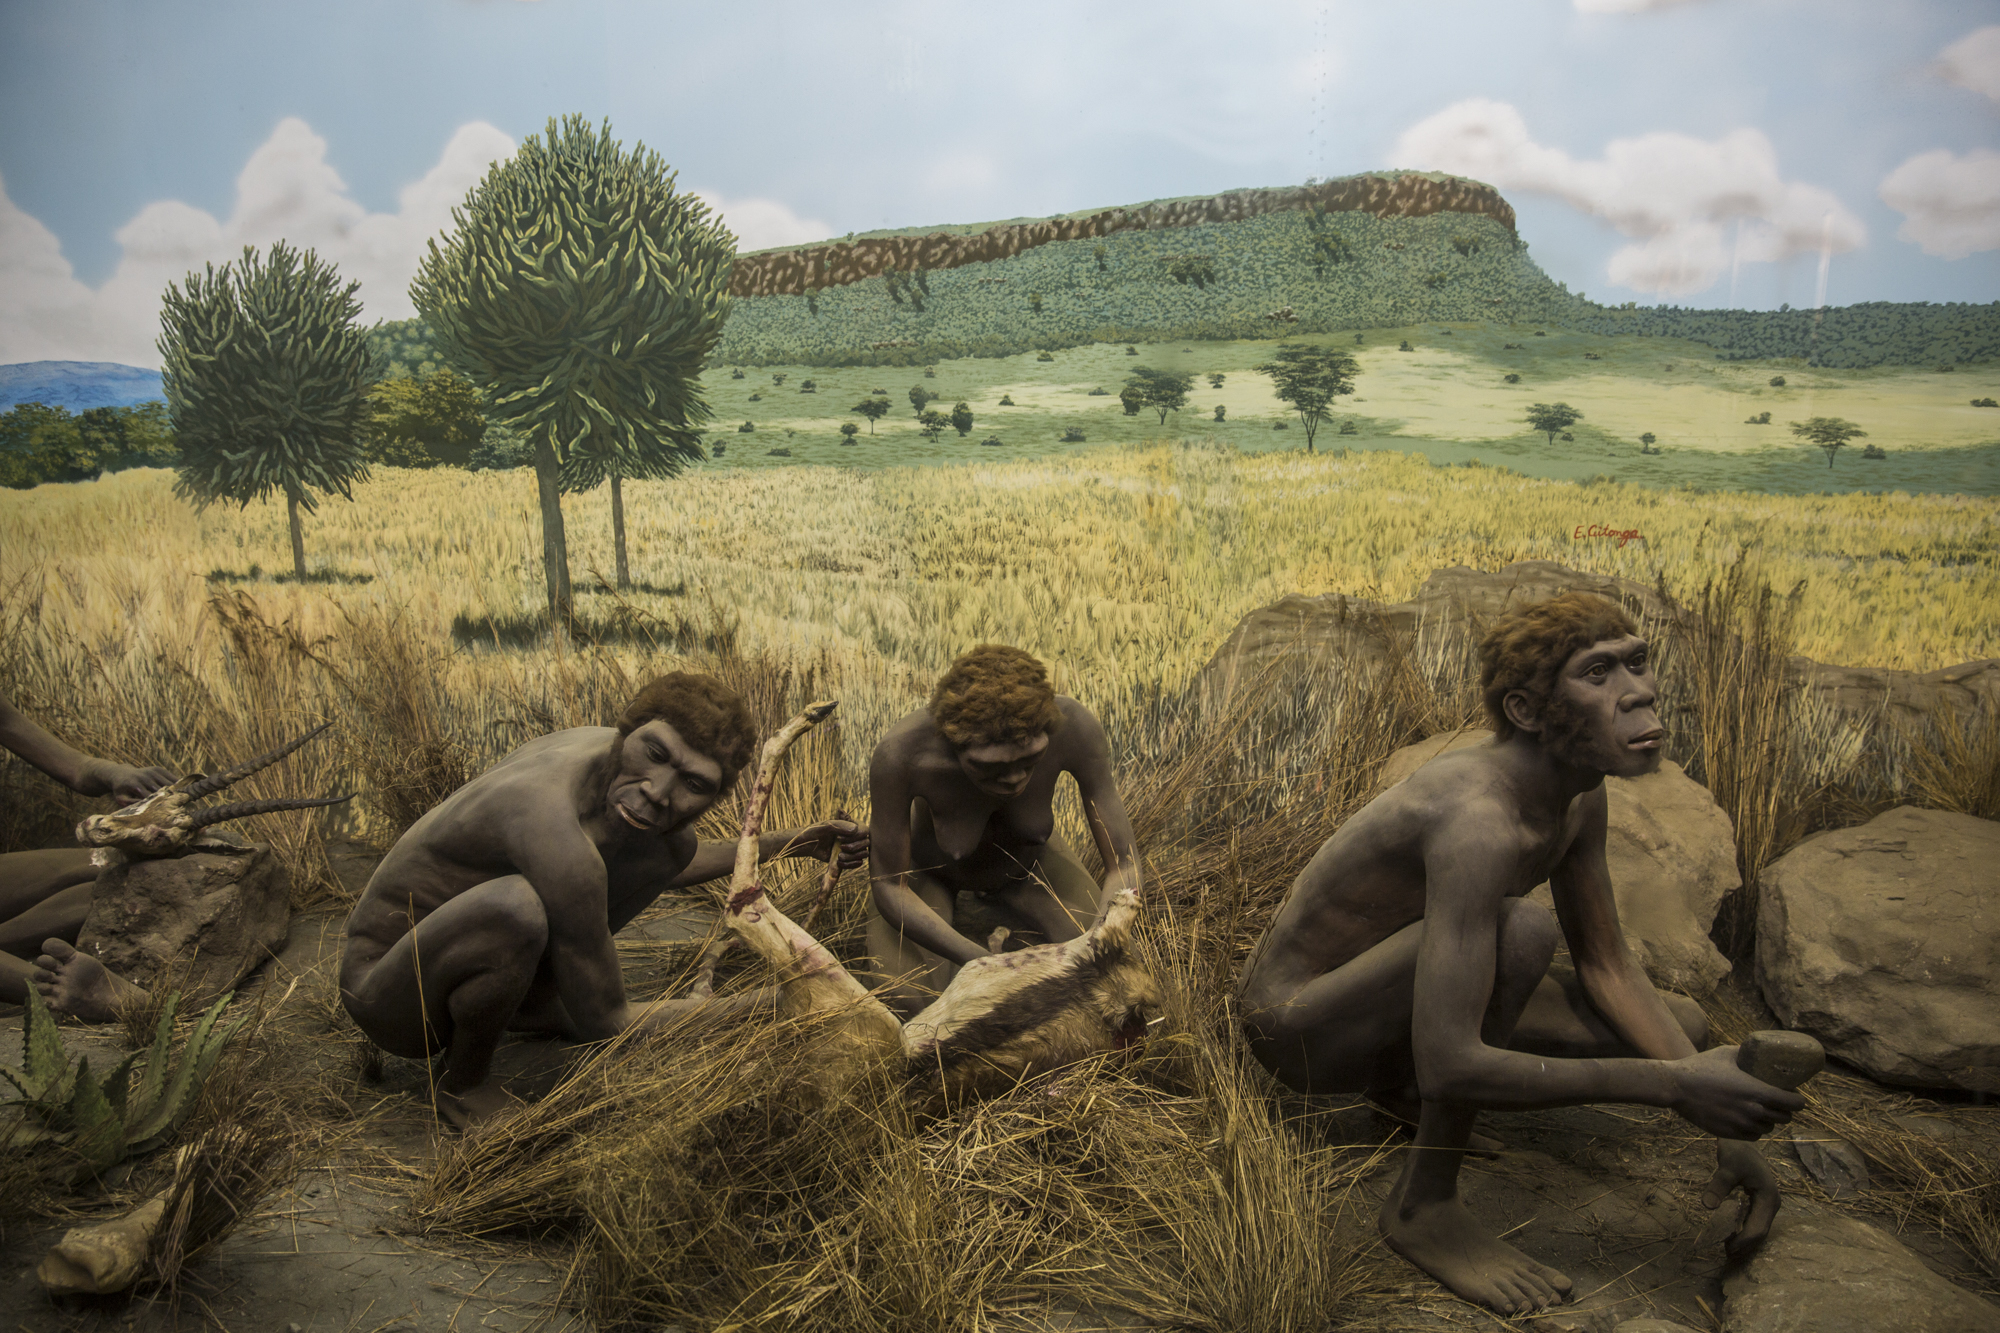 The first modern humans, or Homo Sapiens, date back 200,000 years. That's 33x as long as recorded human civilization. Imagine the type of shit that went down. It wasn't just a bunch of random monkey looking people hanging out by themselves. They absolutely got banded up into tribes and you know they went to war with each other. u/willinaustin